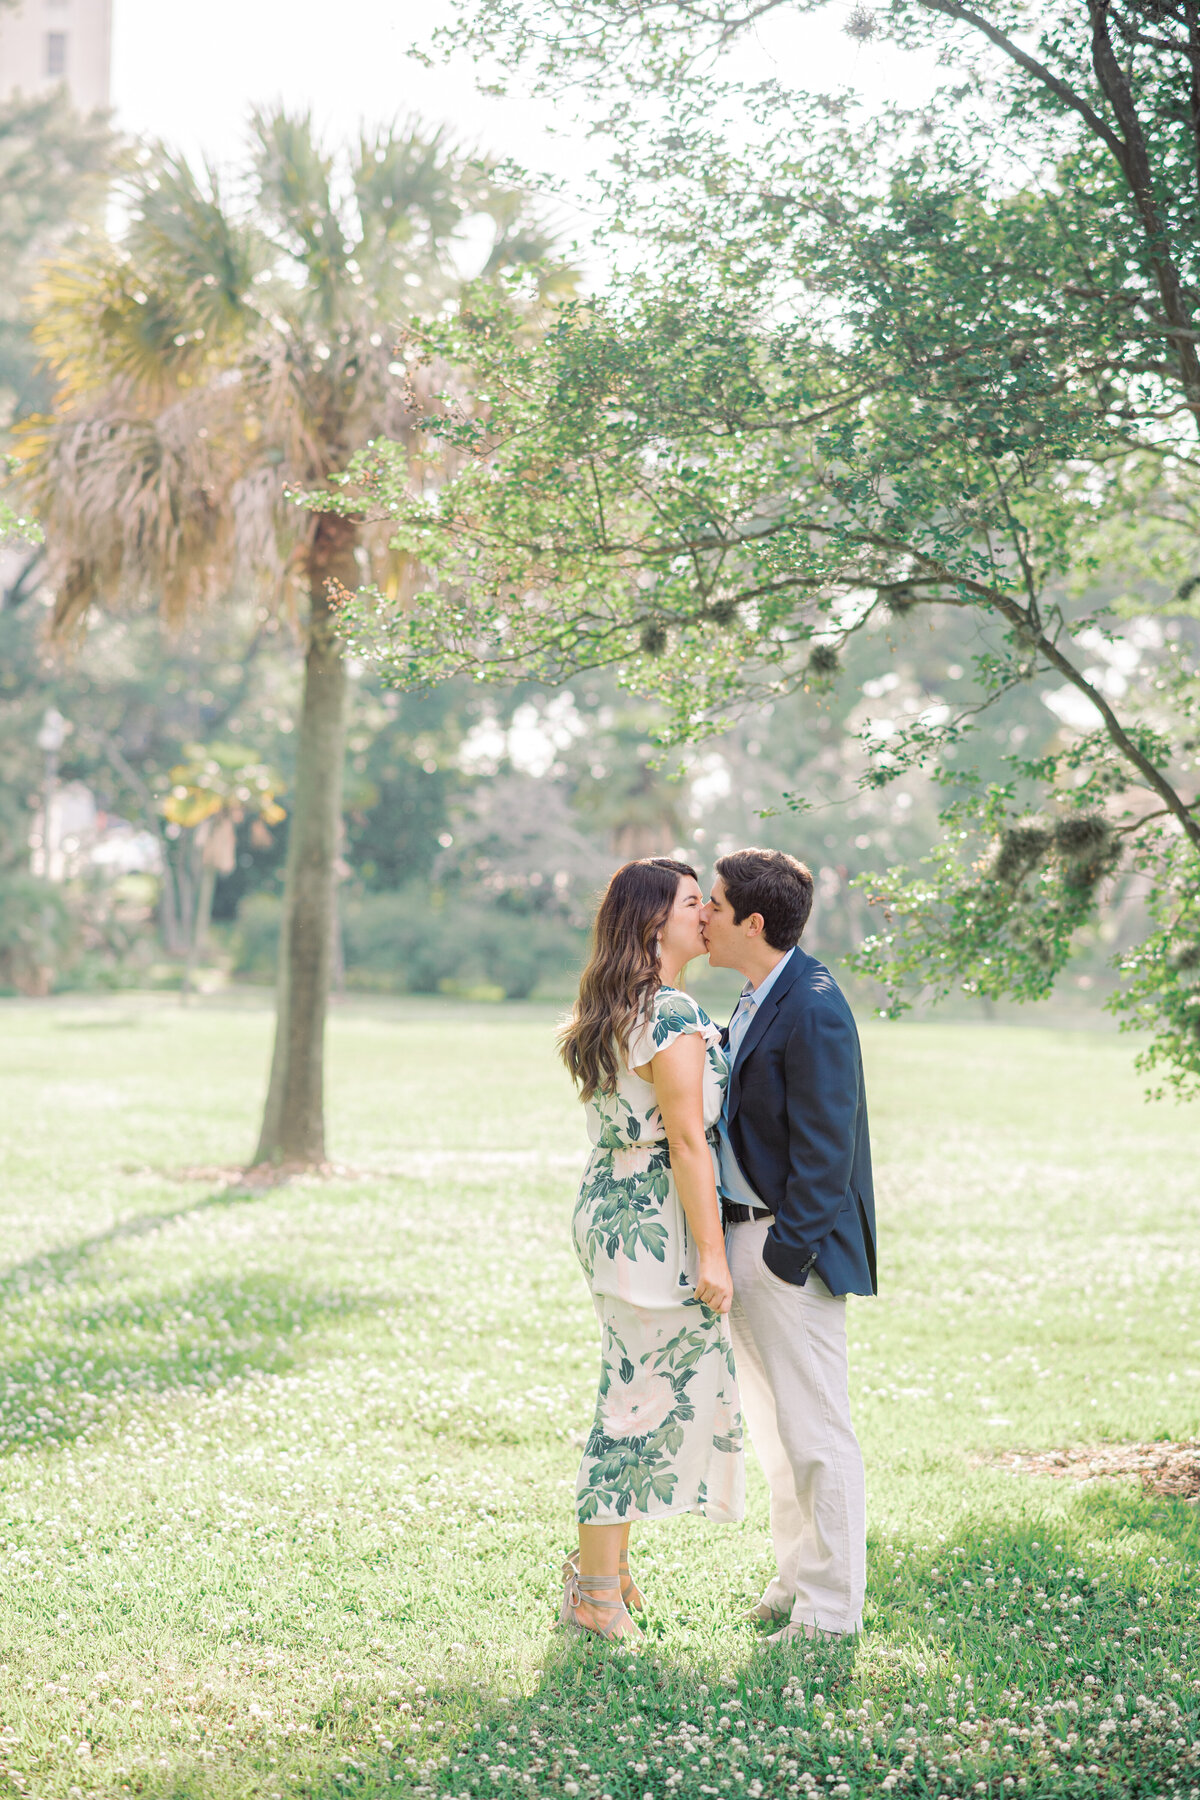 Arsenal Park Engagements in Baton Rouge-33